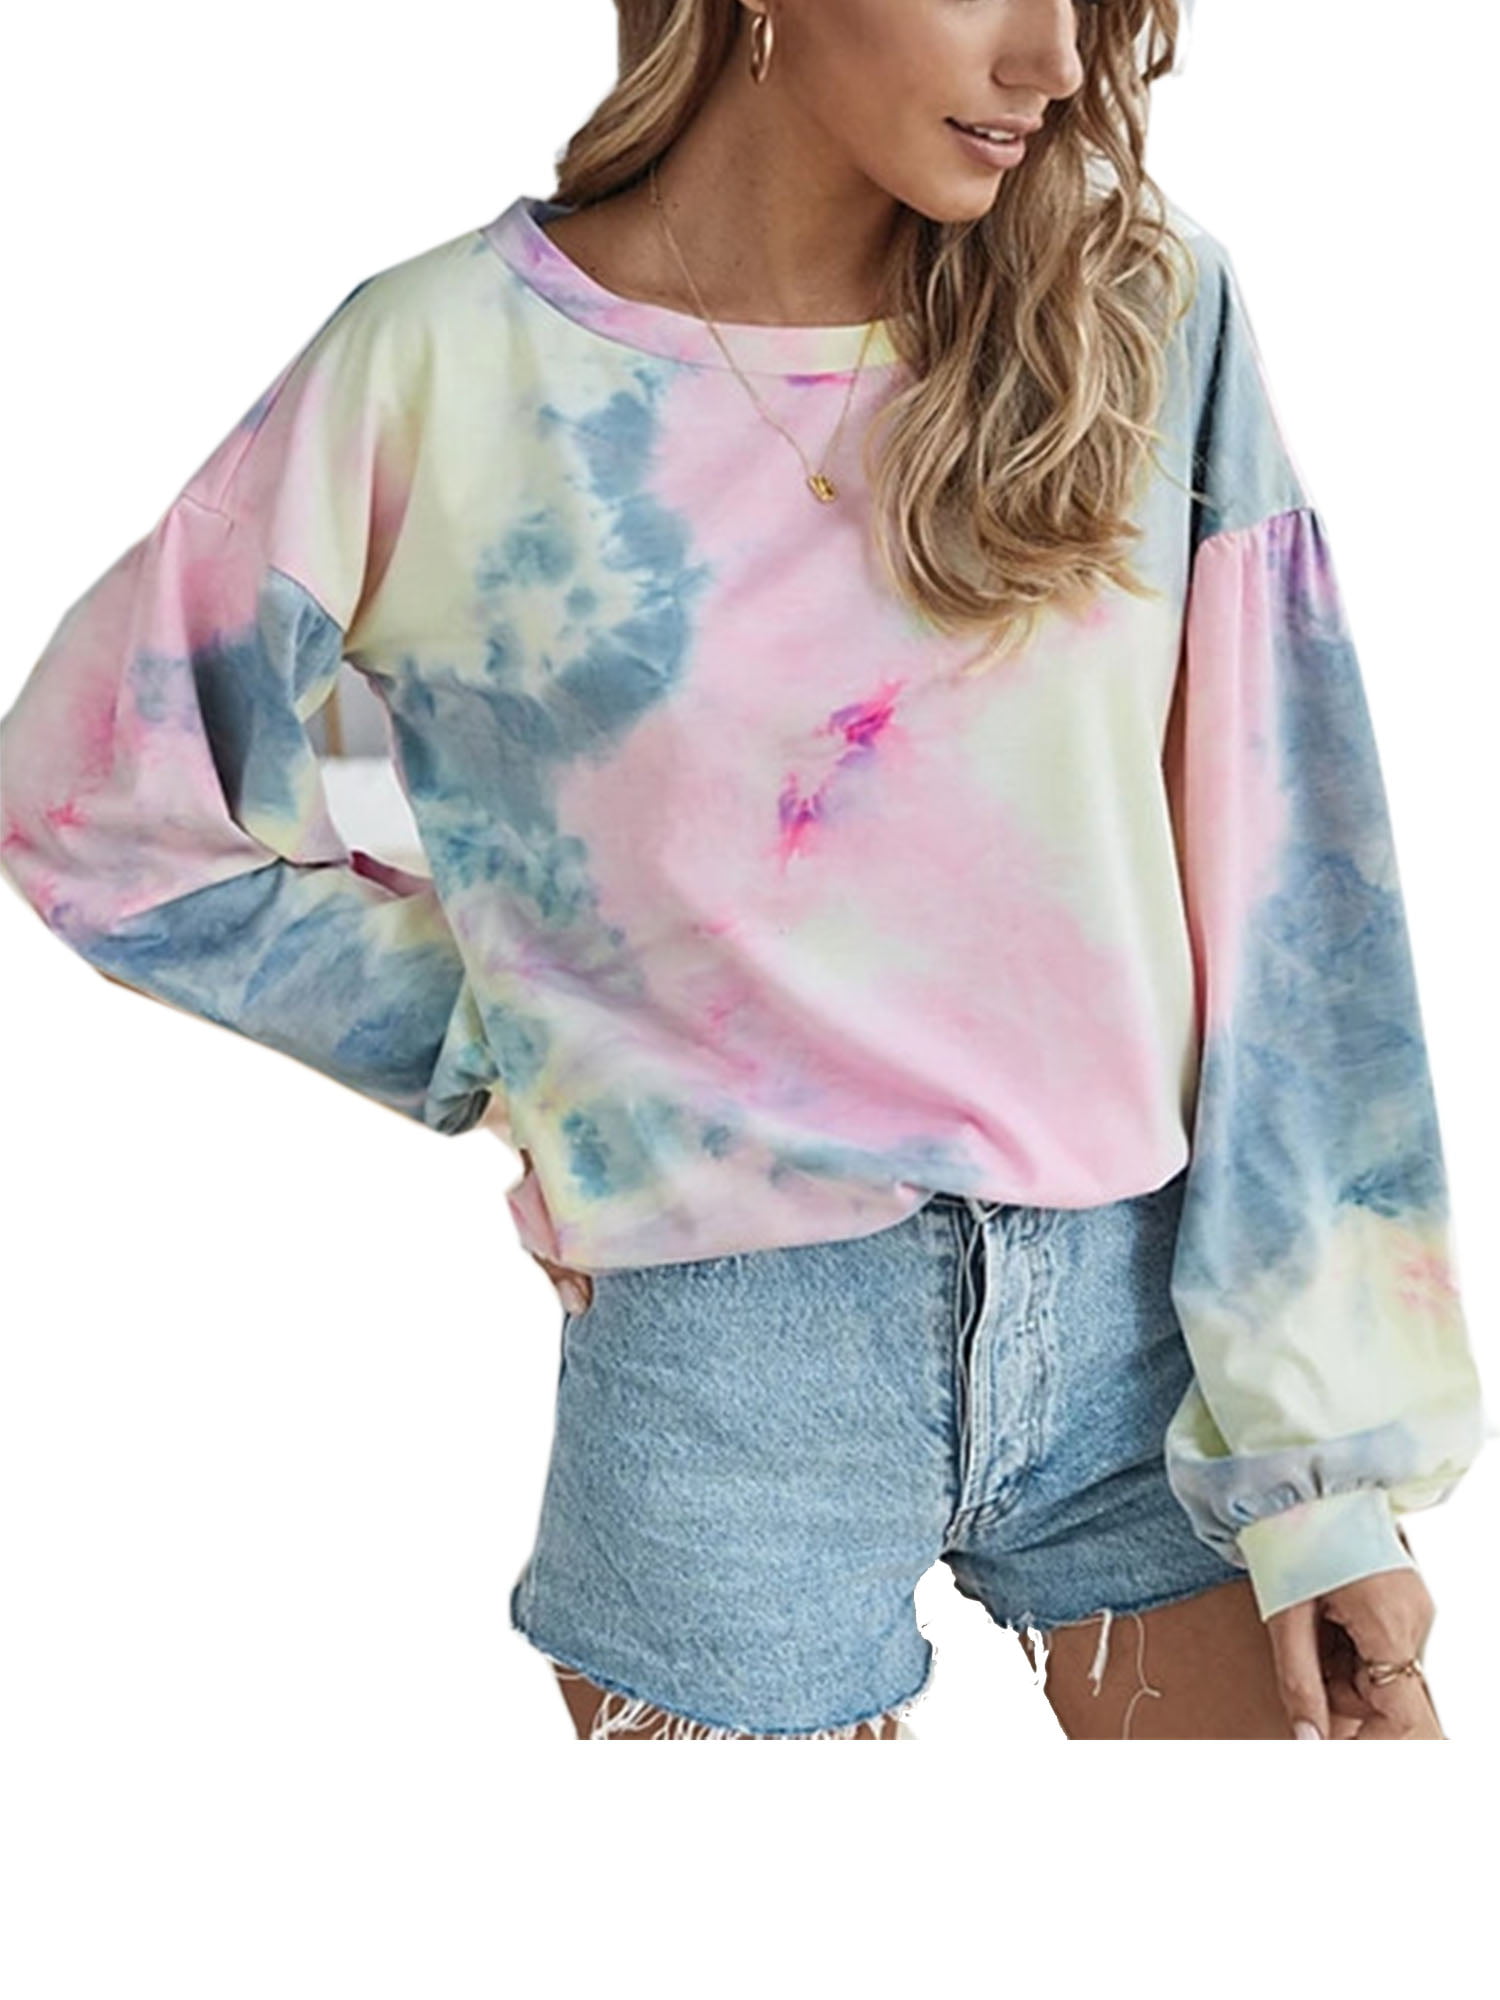 Lazapa Pullover Blouse for Women Round Neck Long-Sleeve Gradient Tie Dye Sweatshirt Tops Loose Casual Shirt Outwear